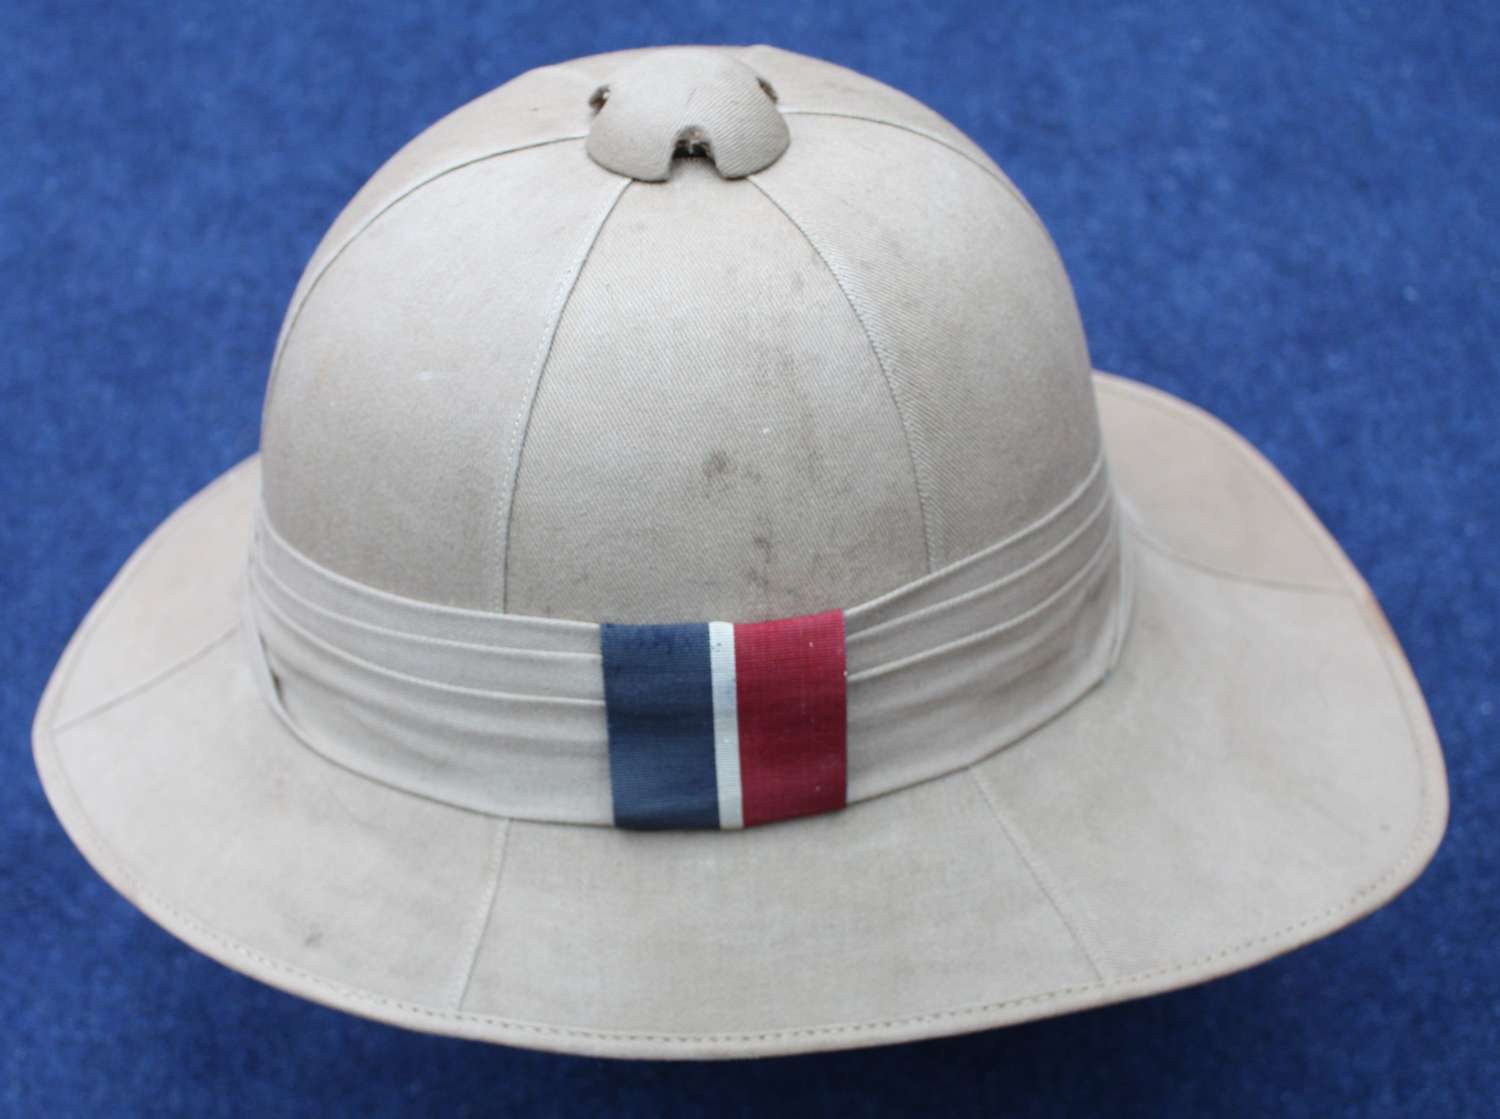 WW2 RAF Pith Helmet in Very Good Condition. Size 6 7/8